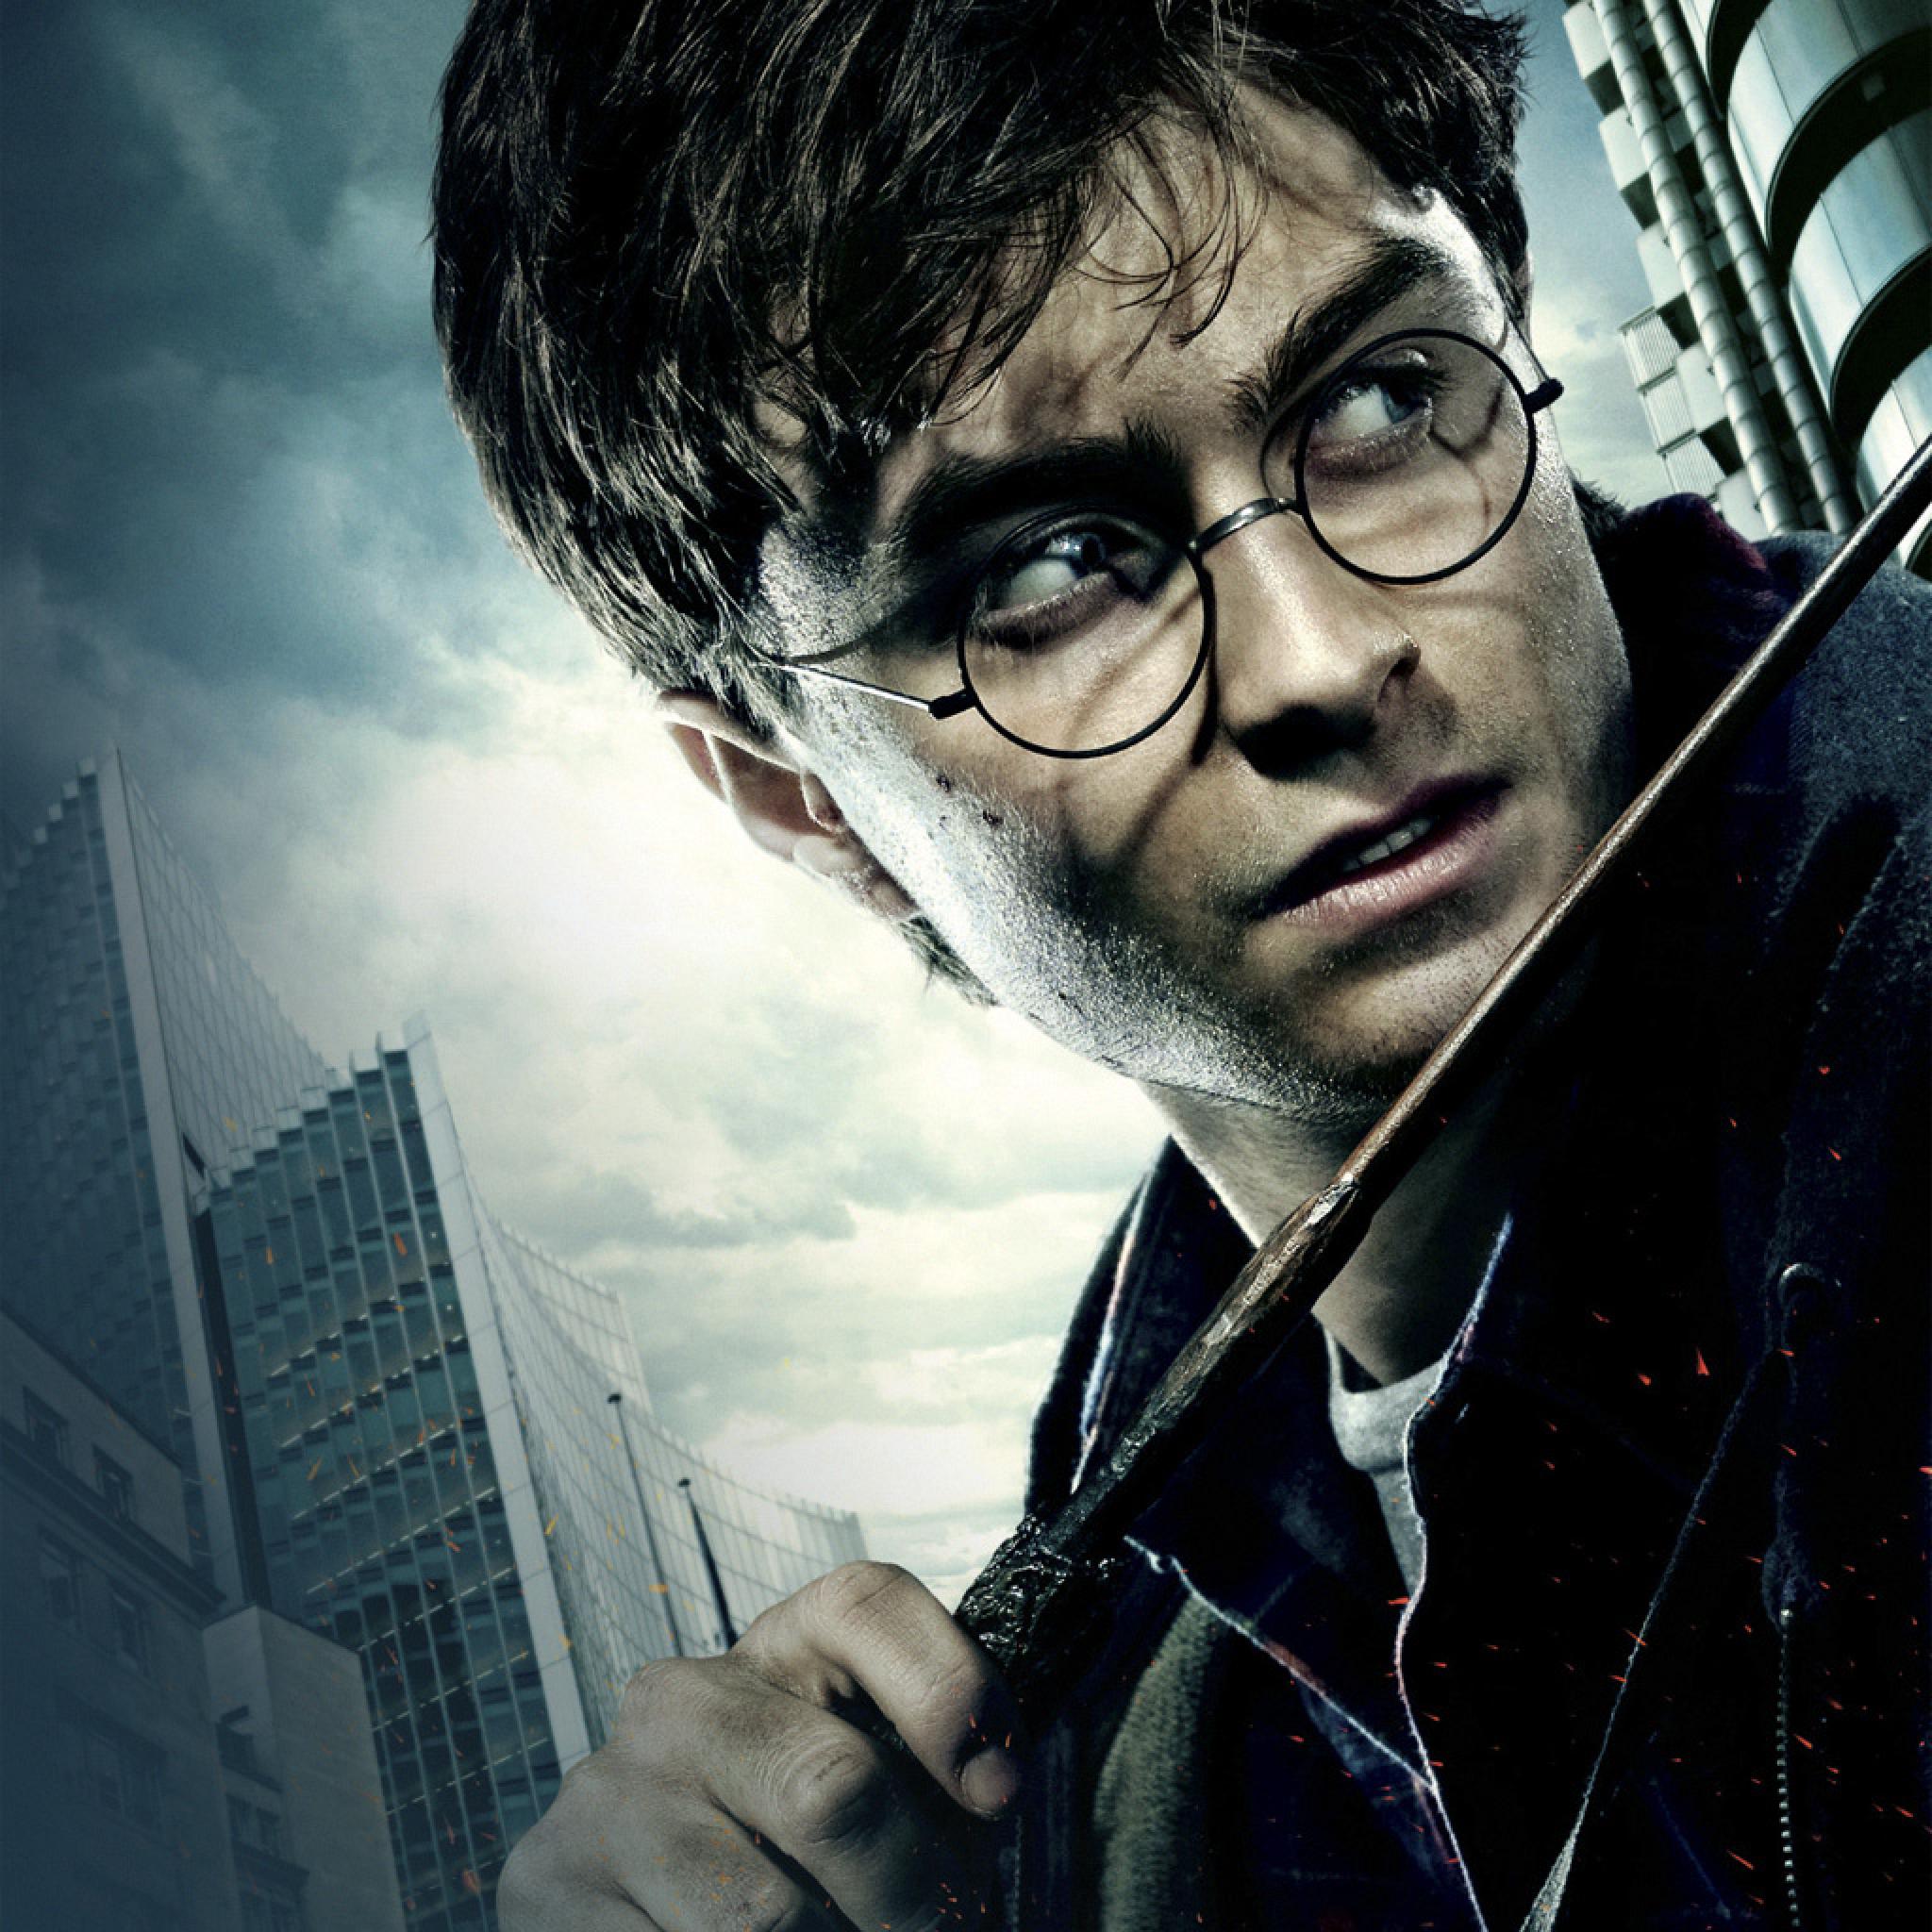 Harry Potter Deathly Hallows Part 1 Poster , HD Wallpaper & Backgrounds